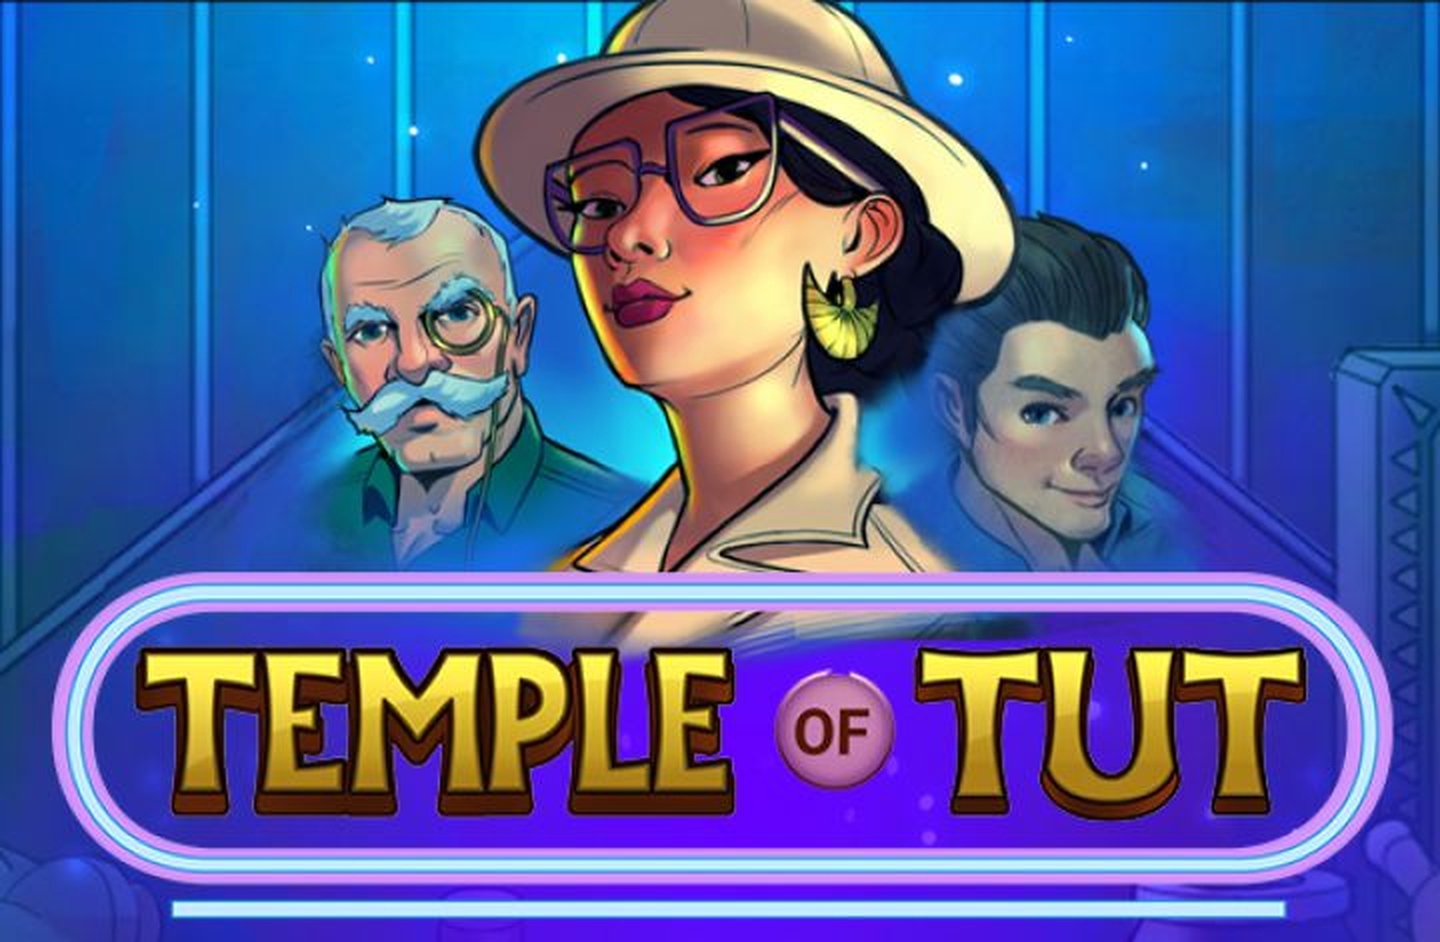 The Temple of Tut Online Slot Demo Game by Just For The Win